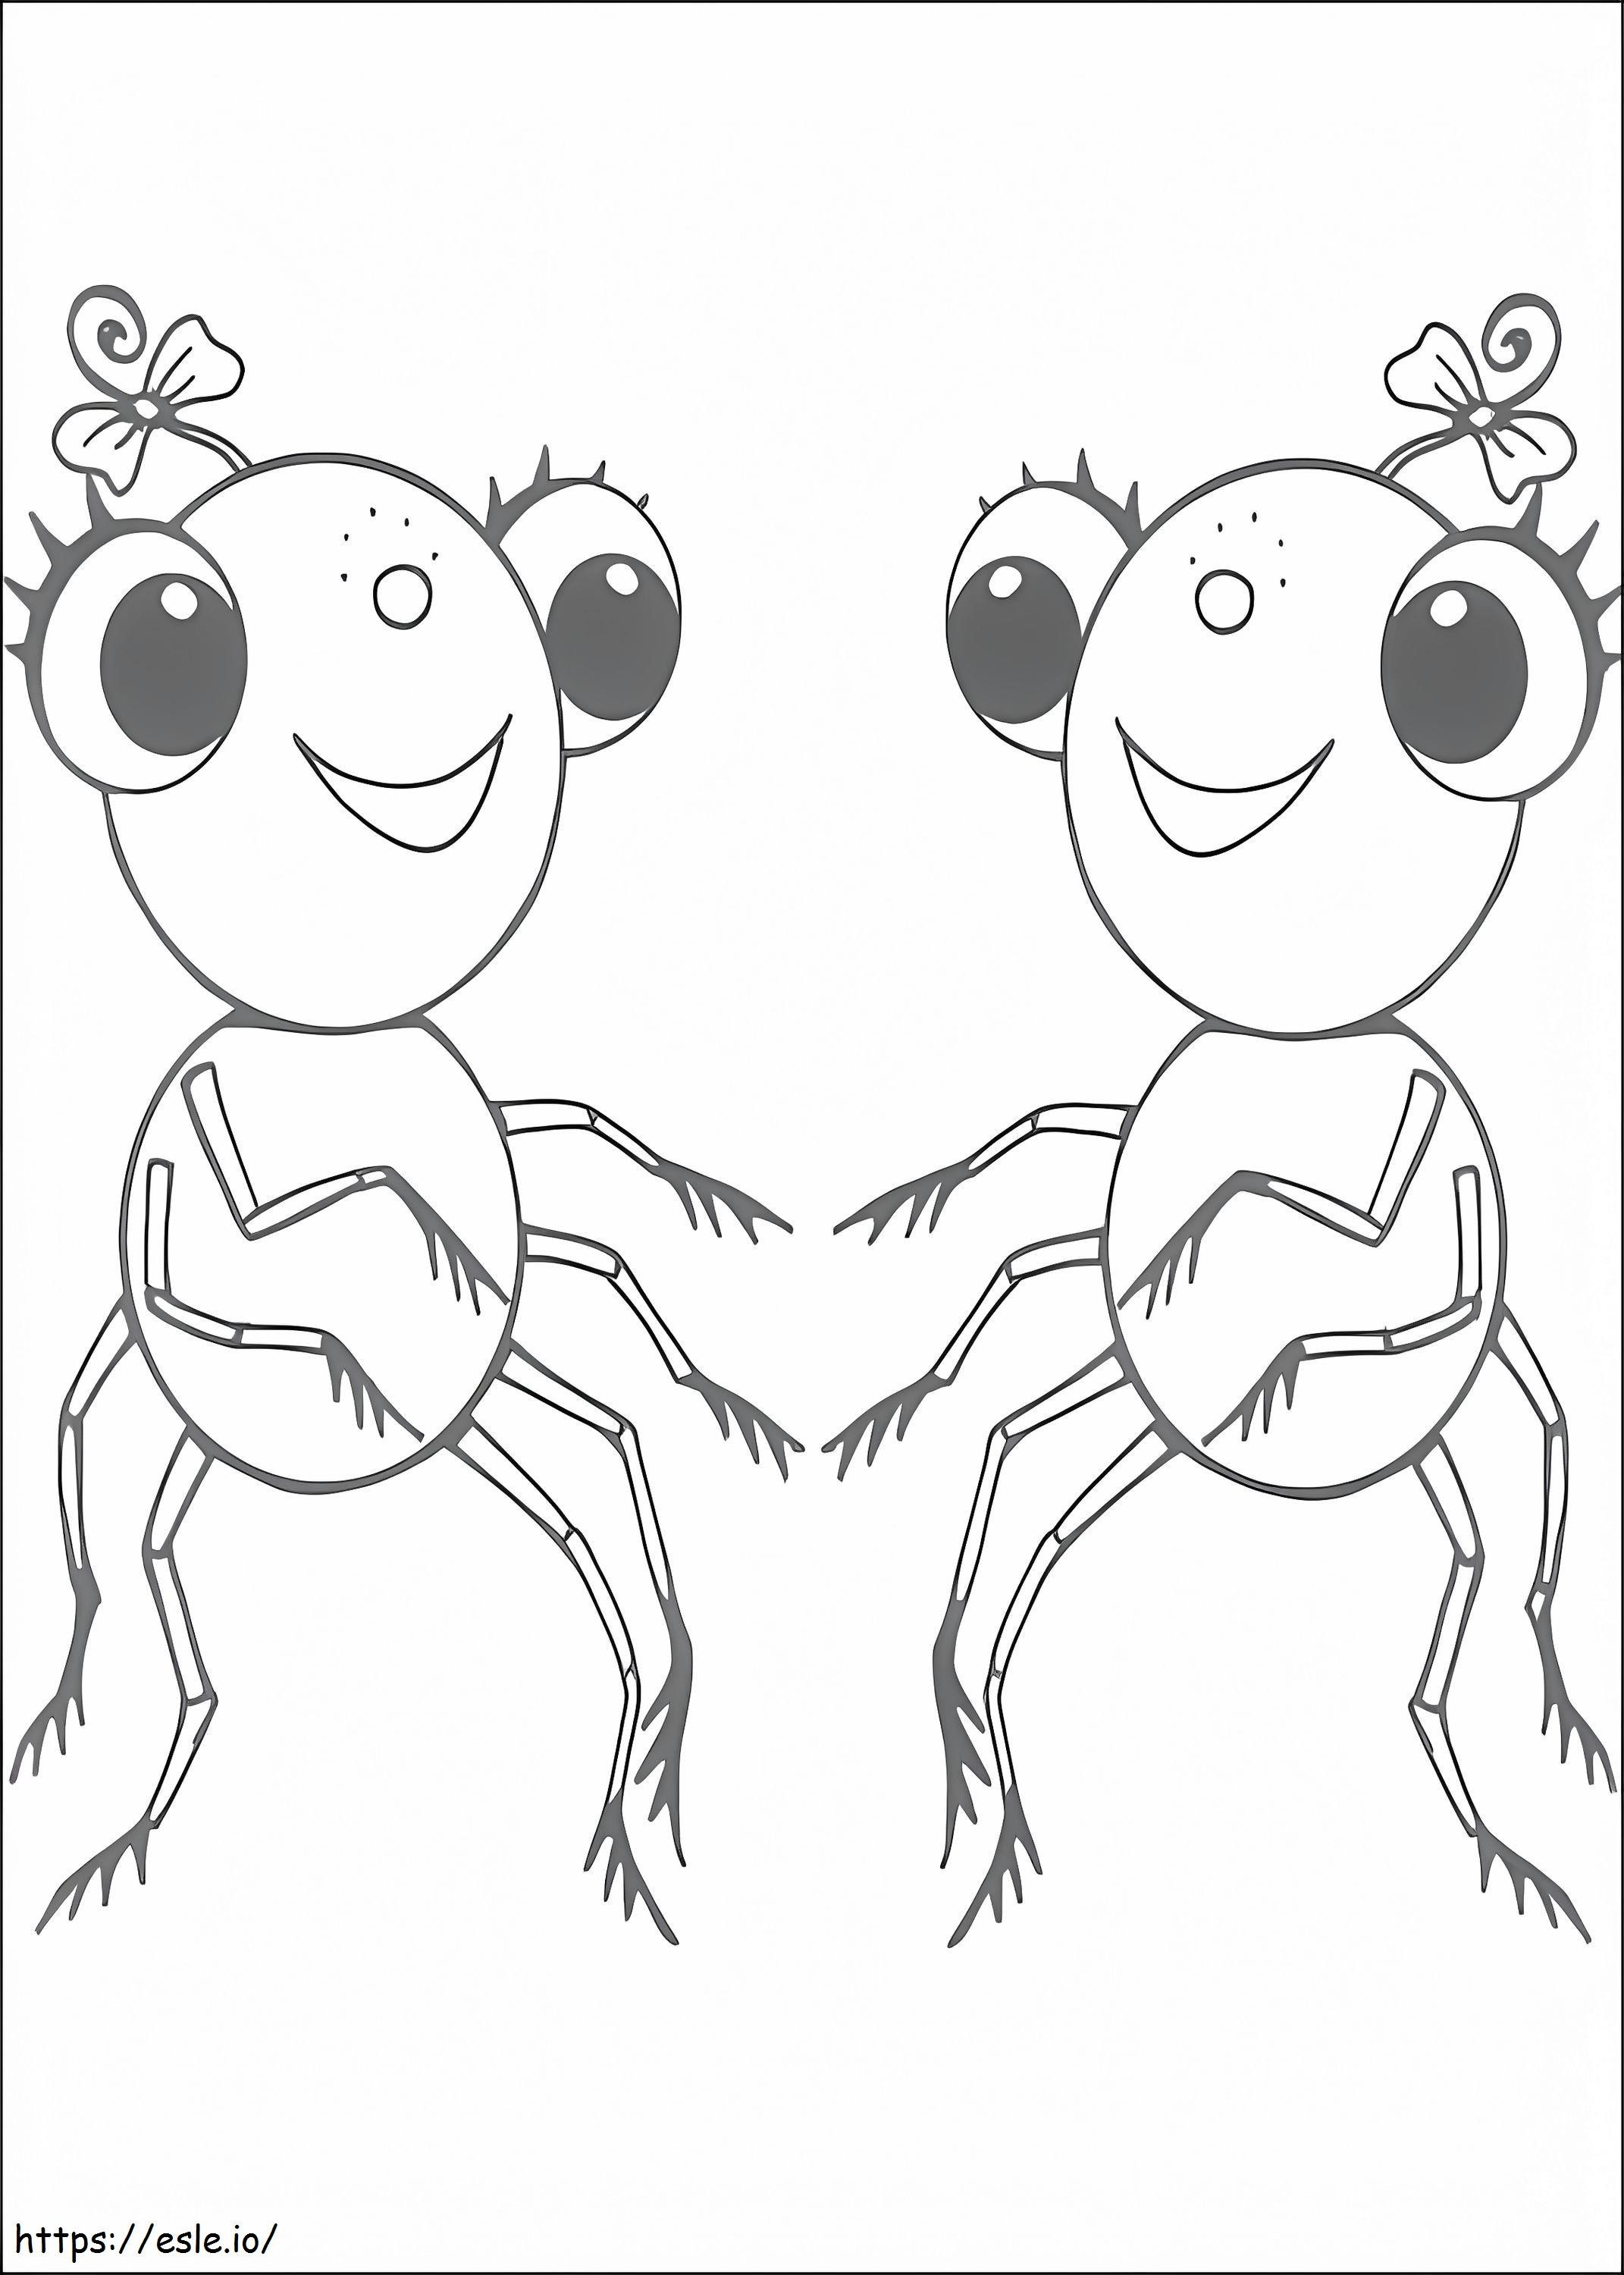 Two Miss Spiders coloring page